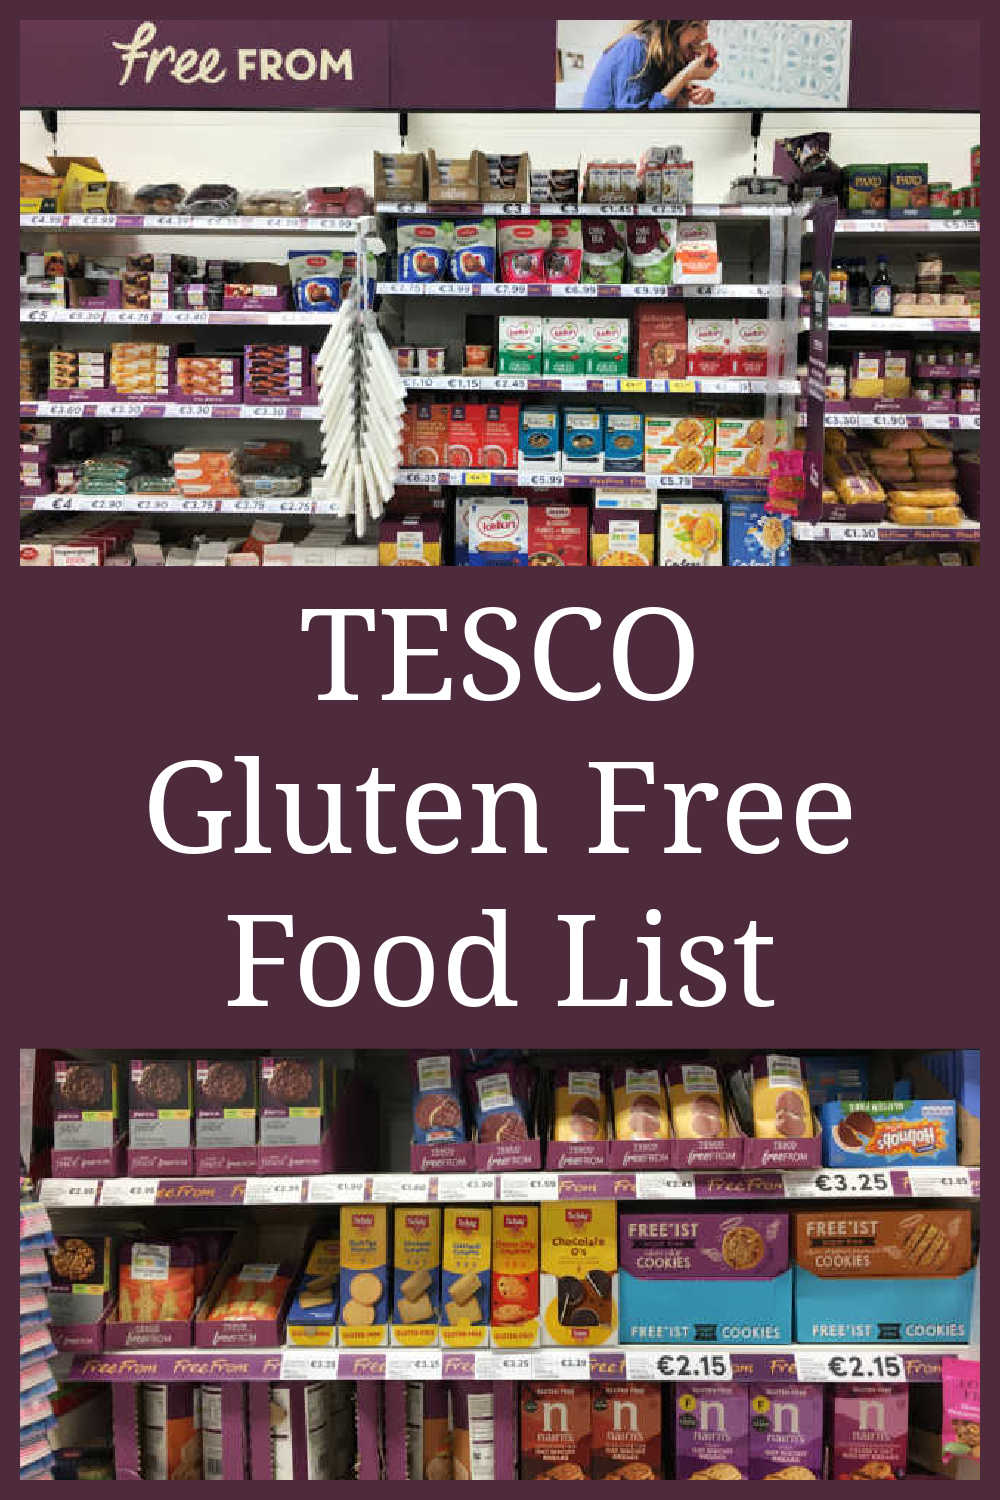 Tesco Gluten Free Food Product List - gluten-free and wheat-free groceries from Tesco's - with a video of a tour around my local store.